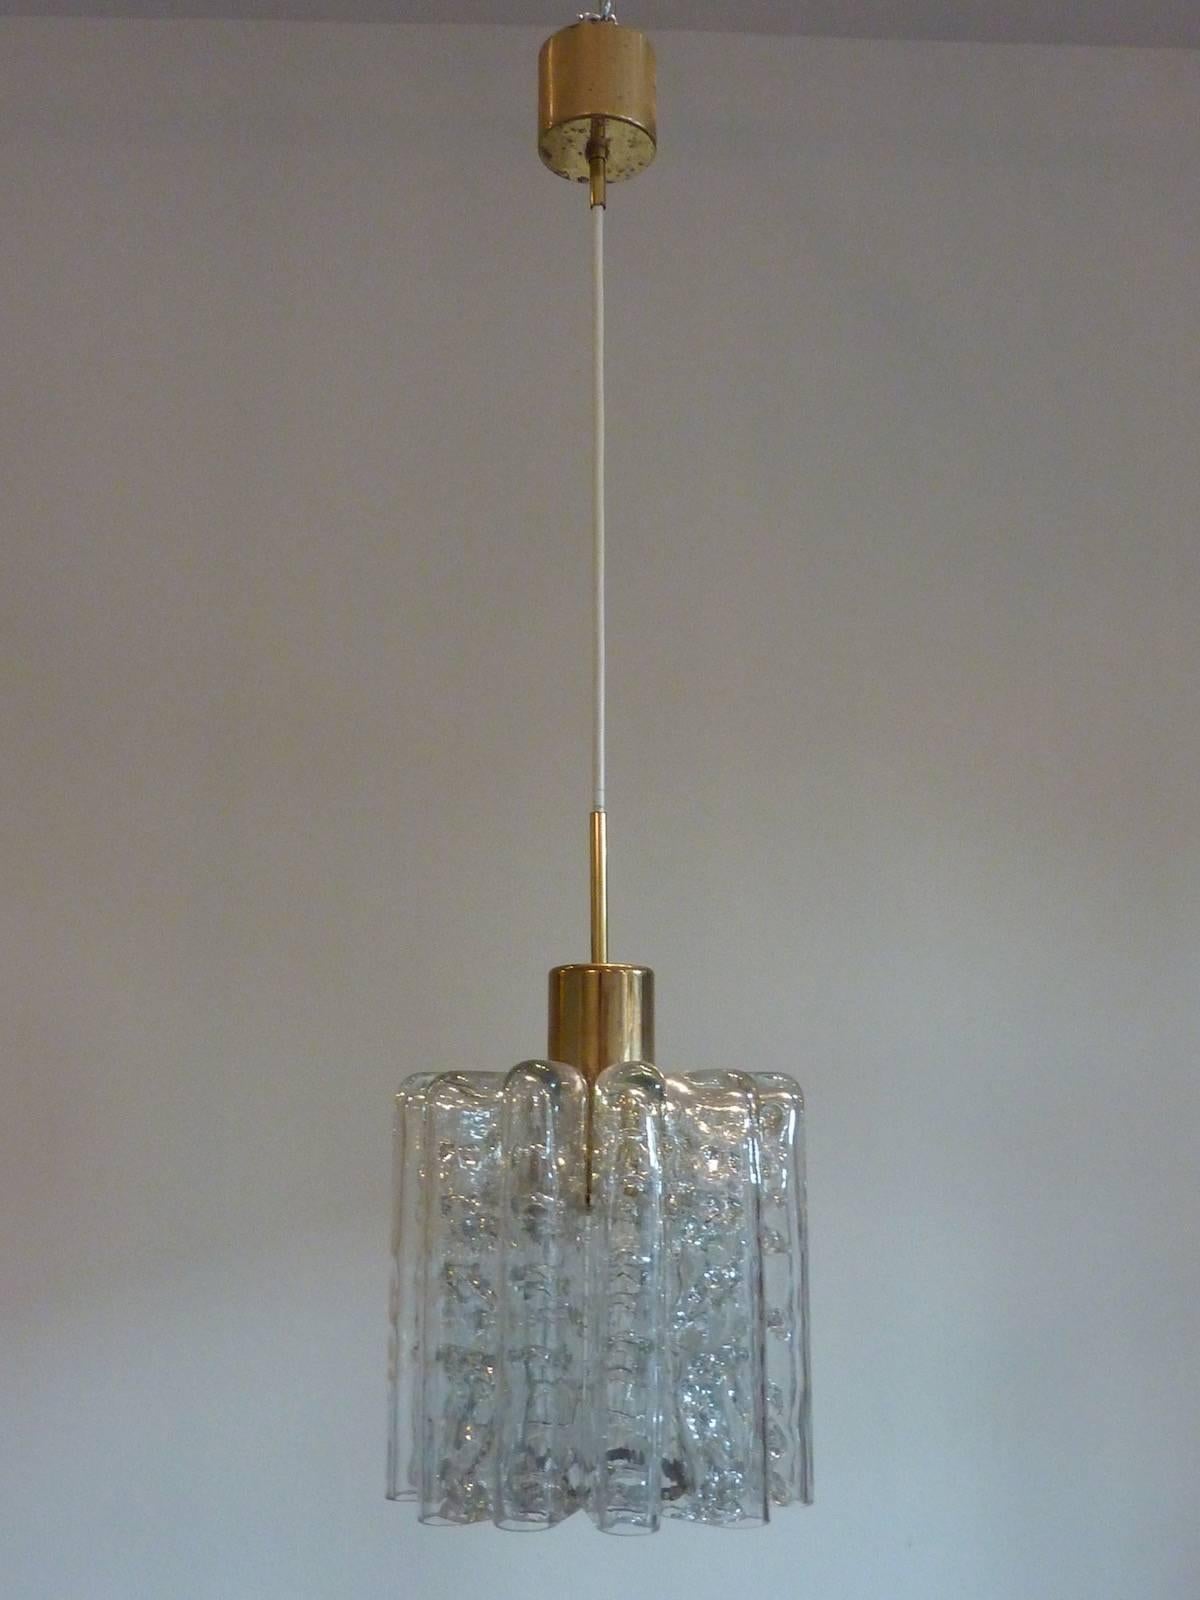 Beautiful pair of organic glass tube ceiling light pendants with brass hardware. Made by Doria Leuchten, Germany in the 1970s. Each has one E27 European Socket.